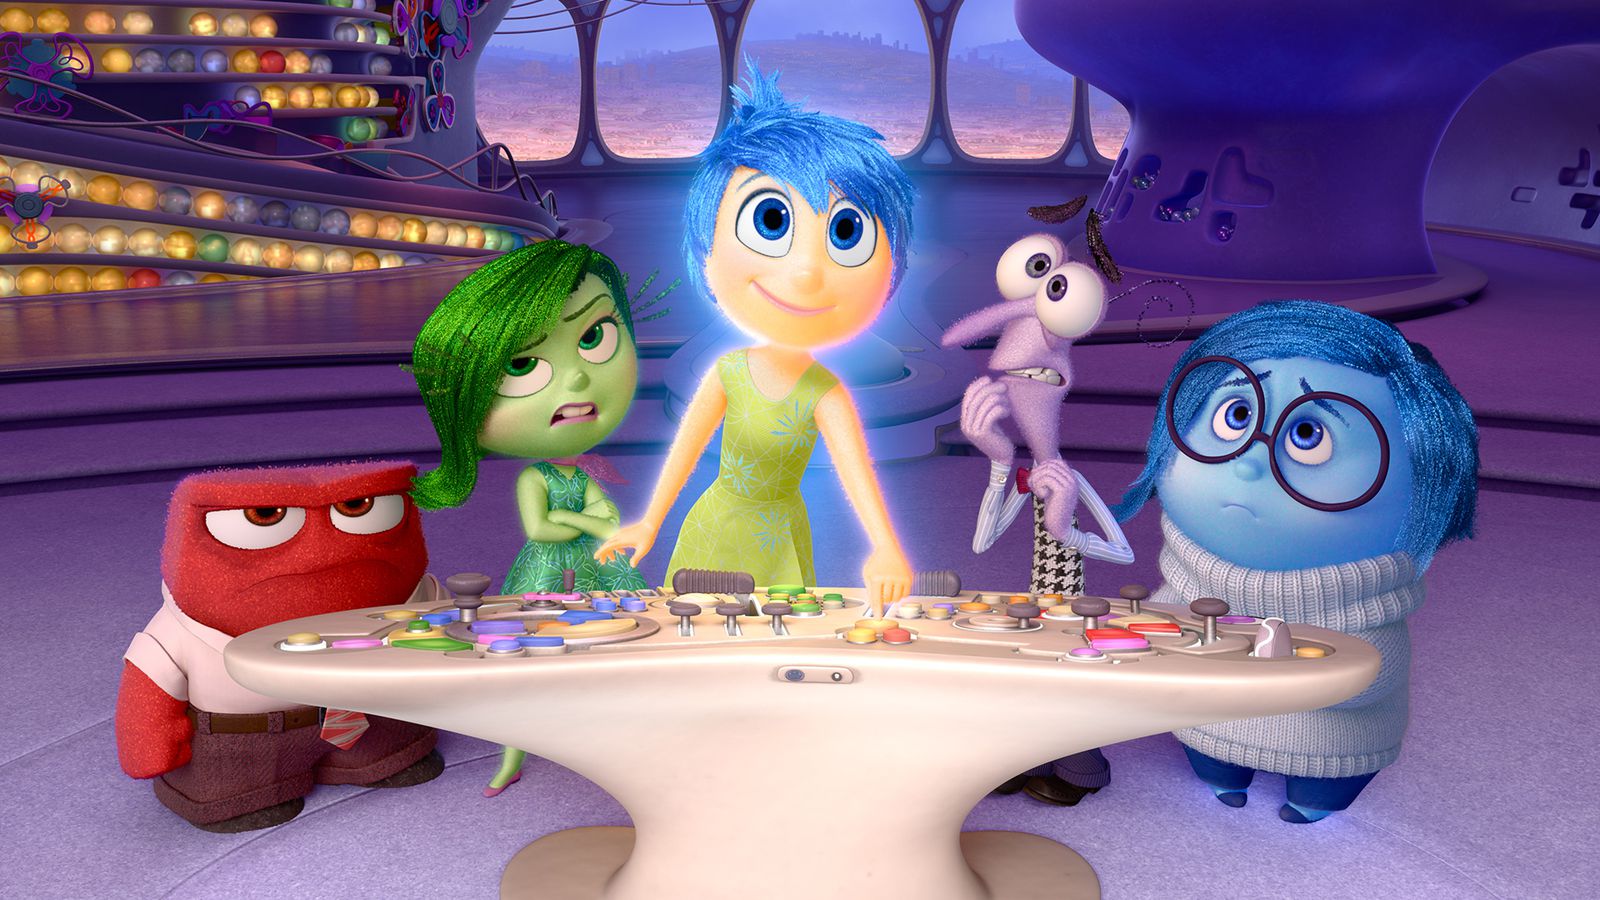 Pixar's Inside Out plays with our